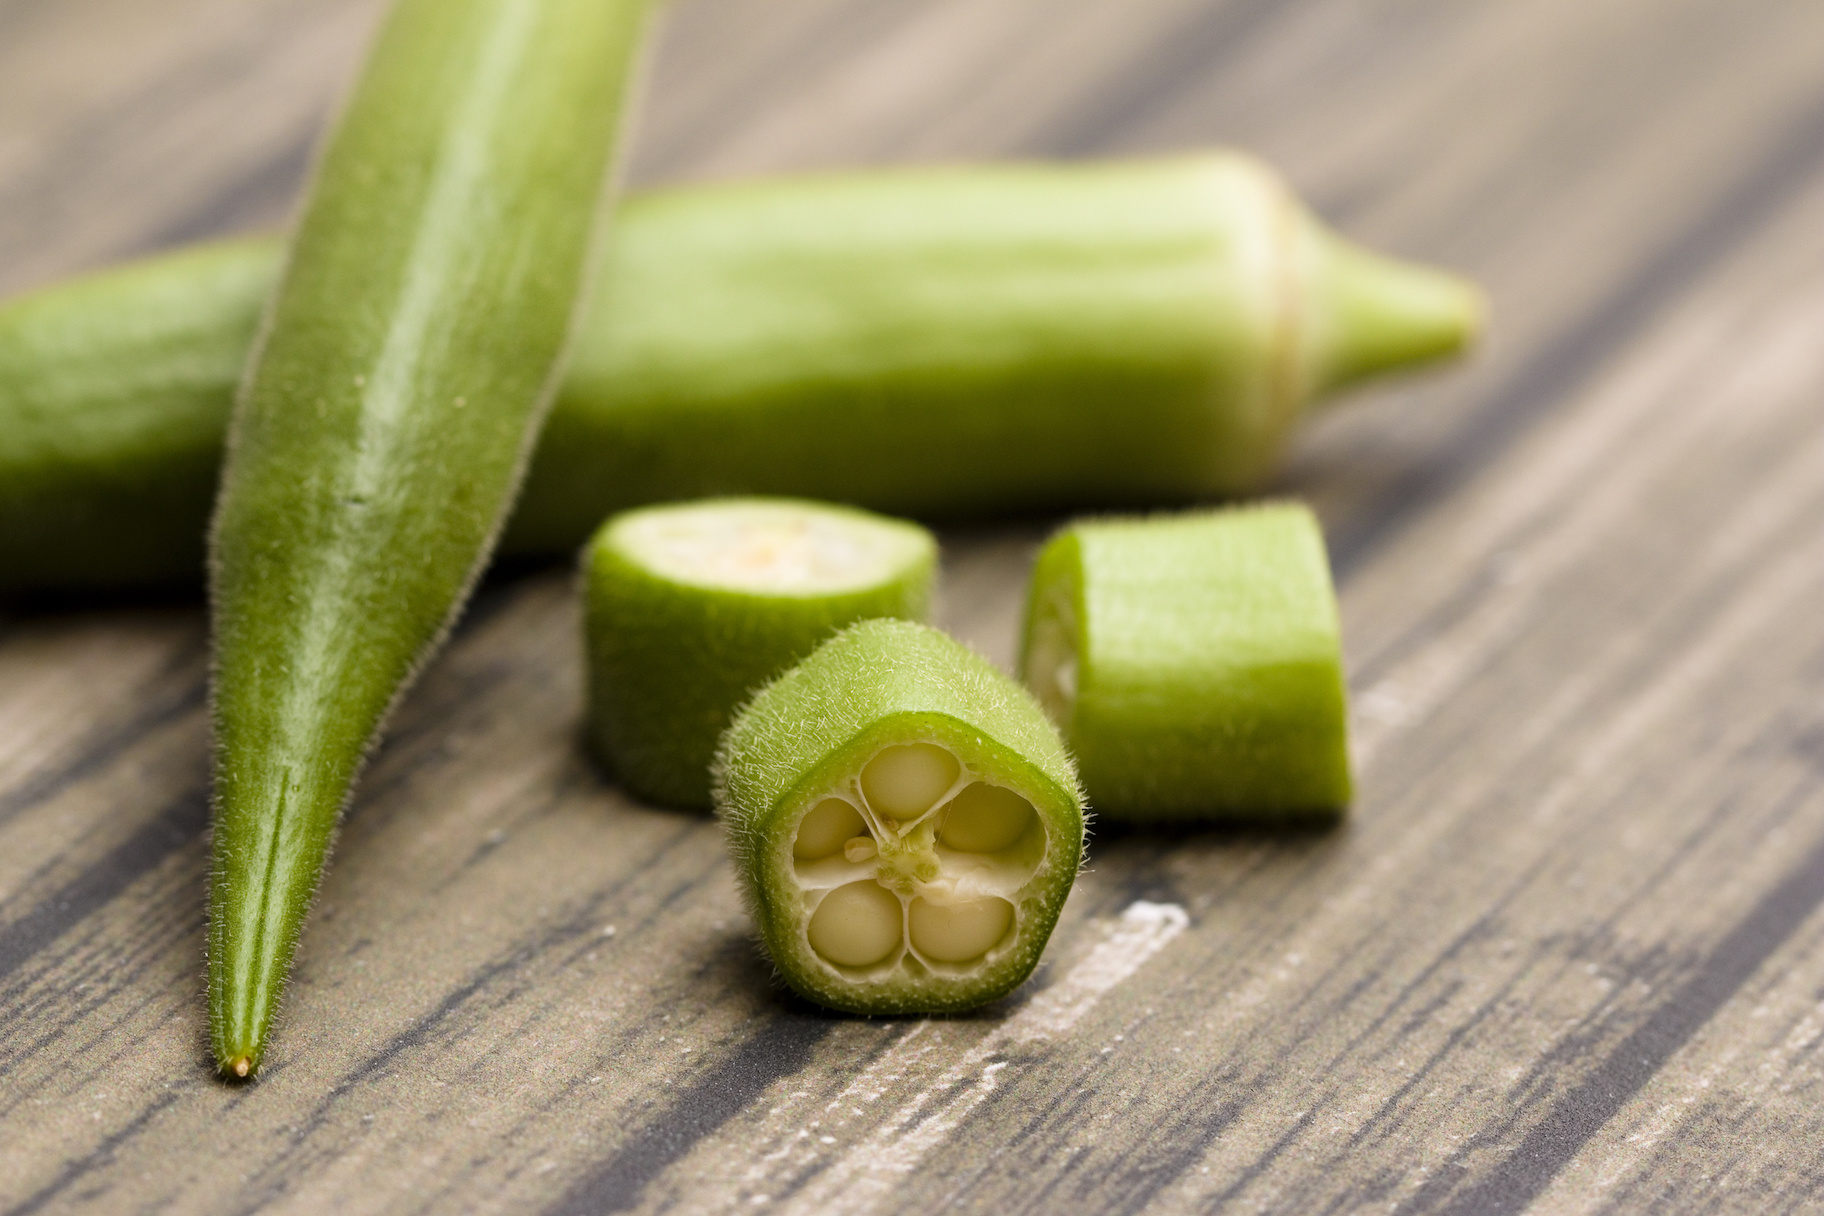 Nutrition: Okra offers these health benefits